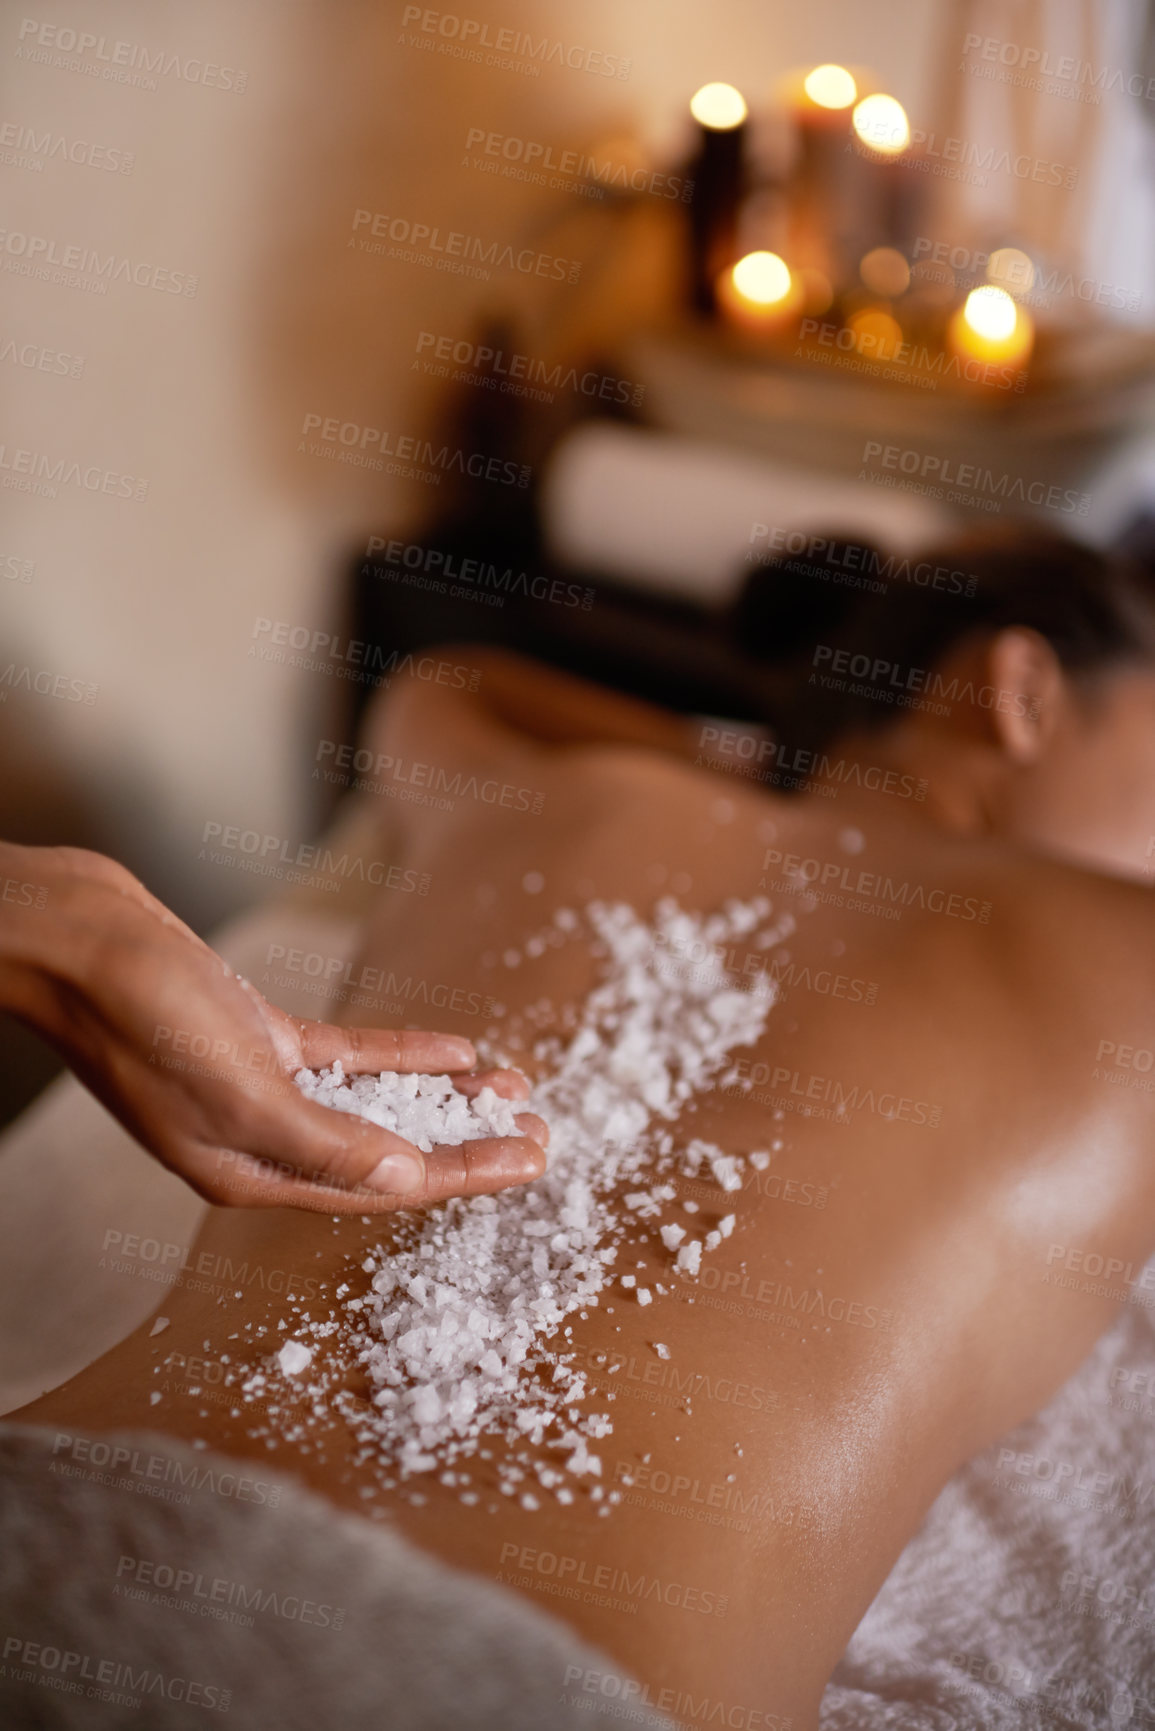 Buy stock photo Shot of a young woman enjoying a salt exfoliation treatment at a spa